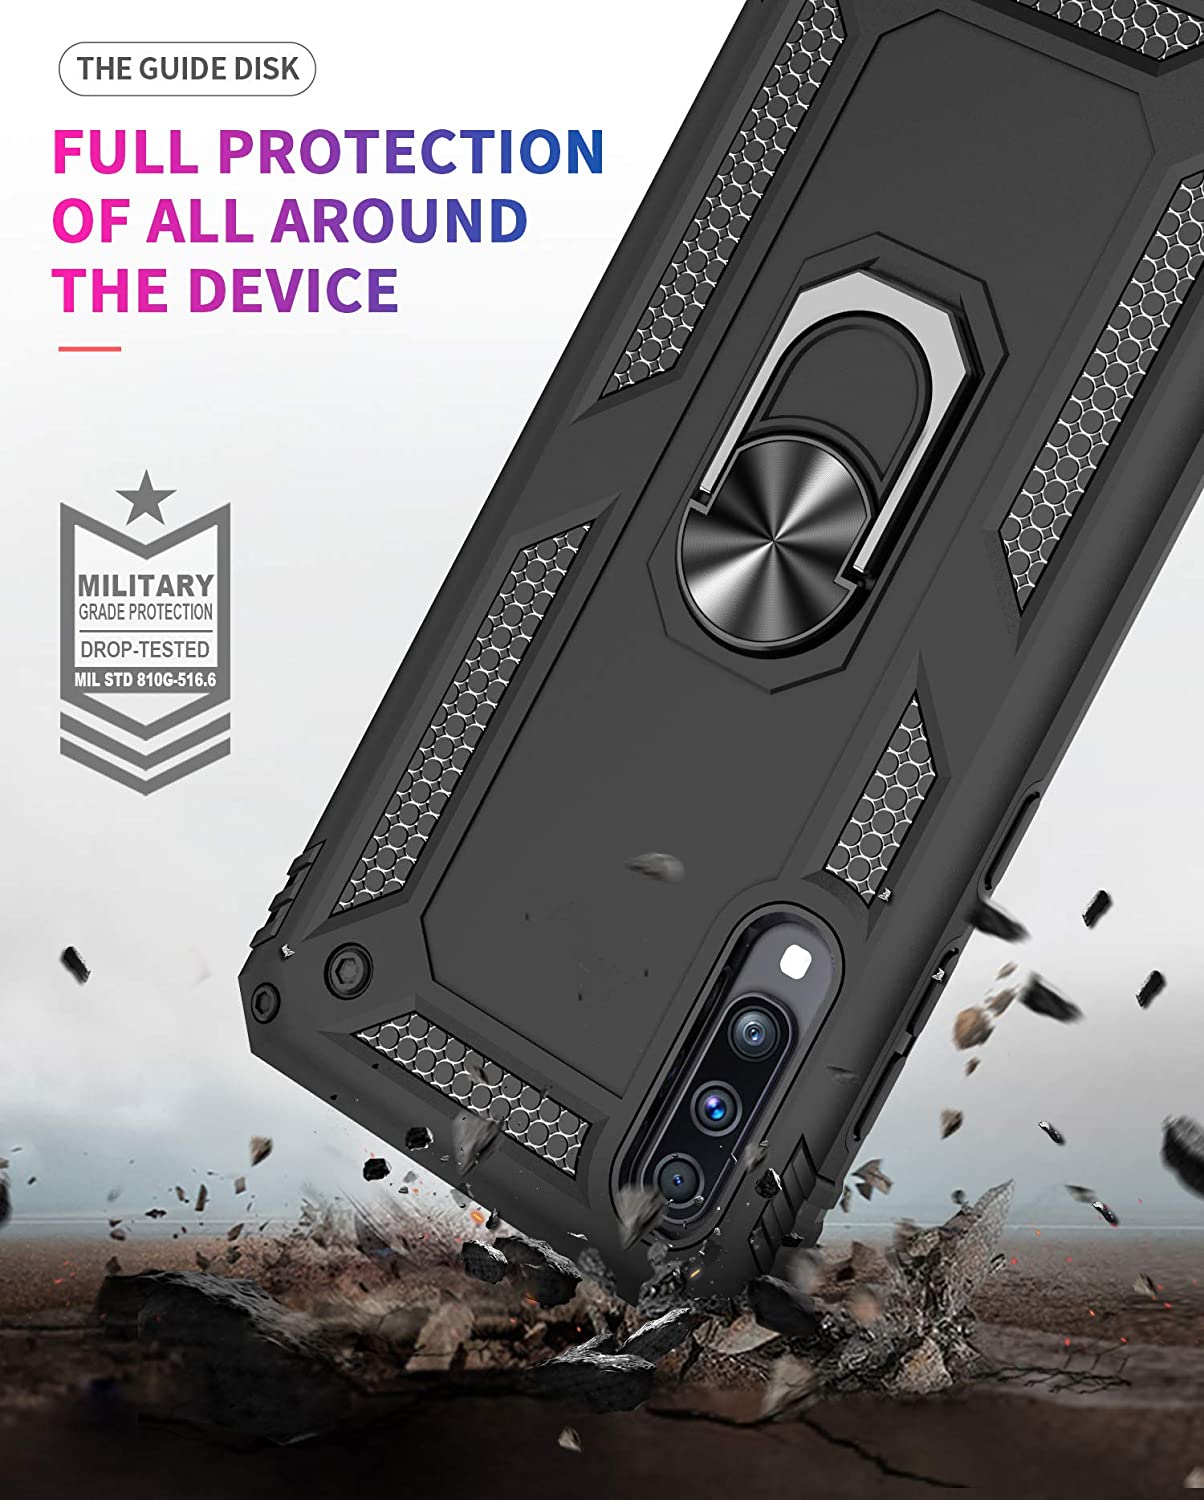 Samsung Galaxy A71 Case Shockproof Heavy Duty Ring Rugged Armor Case Cover